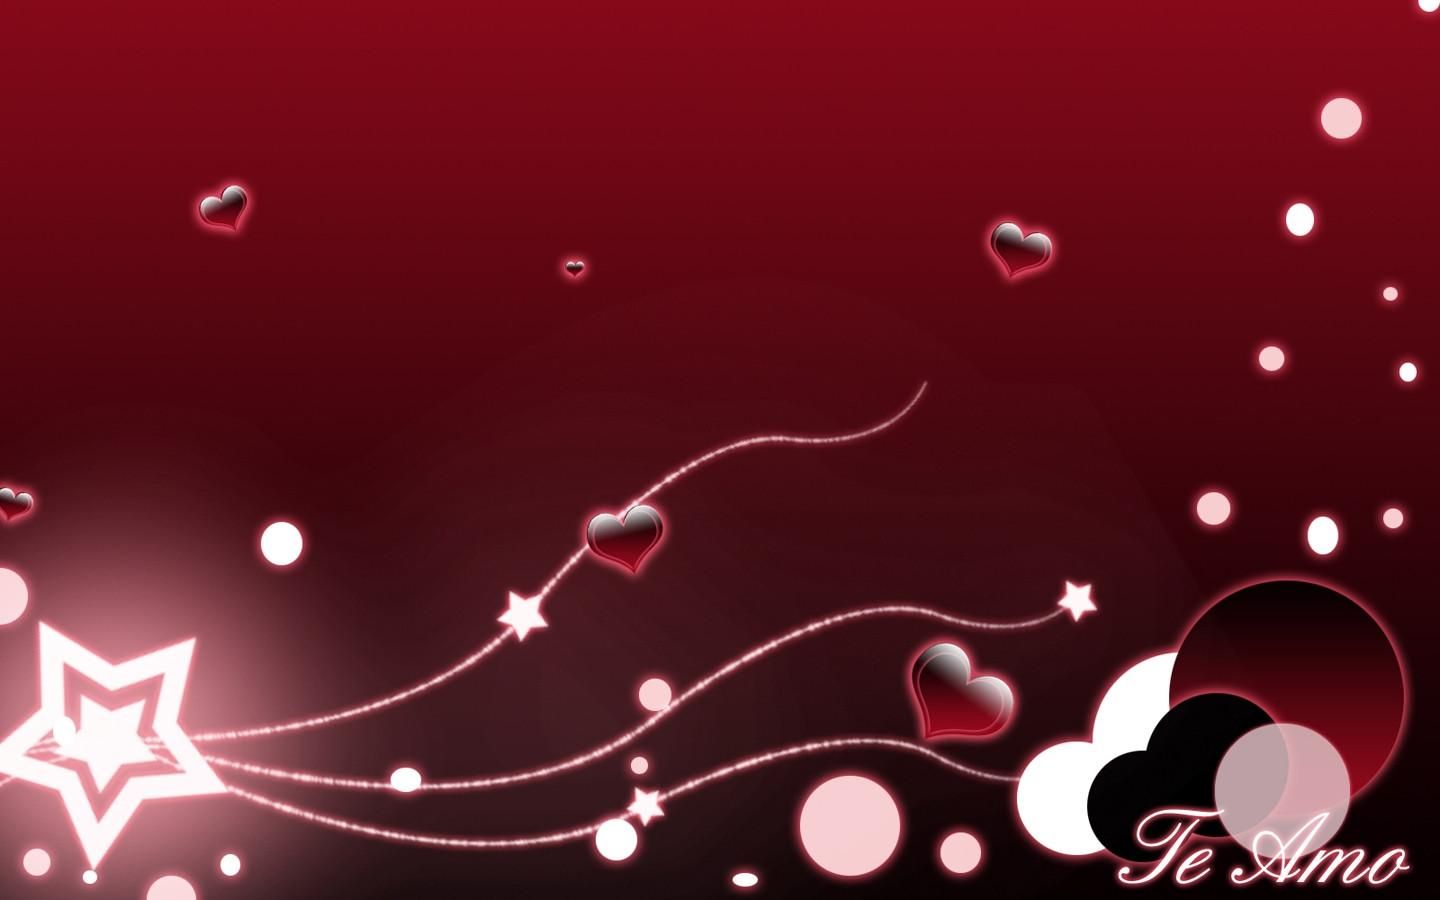 Free I Love You Wallpaper Background Images | HD Wallpapers Range